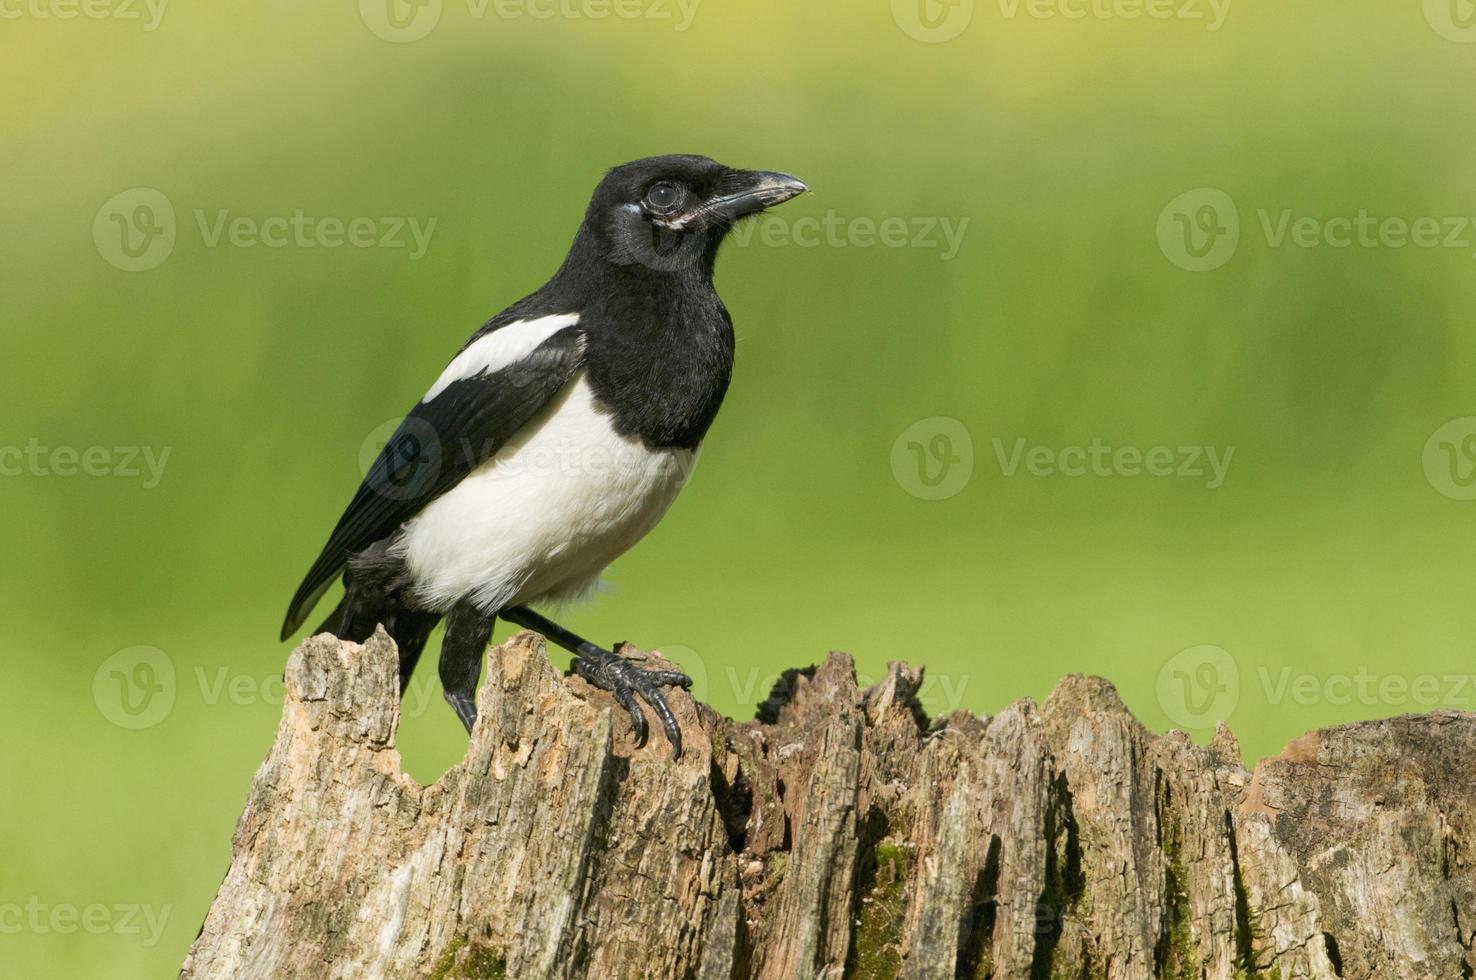 European Magpies (pica pica) perched on tree stump photo